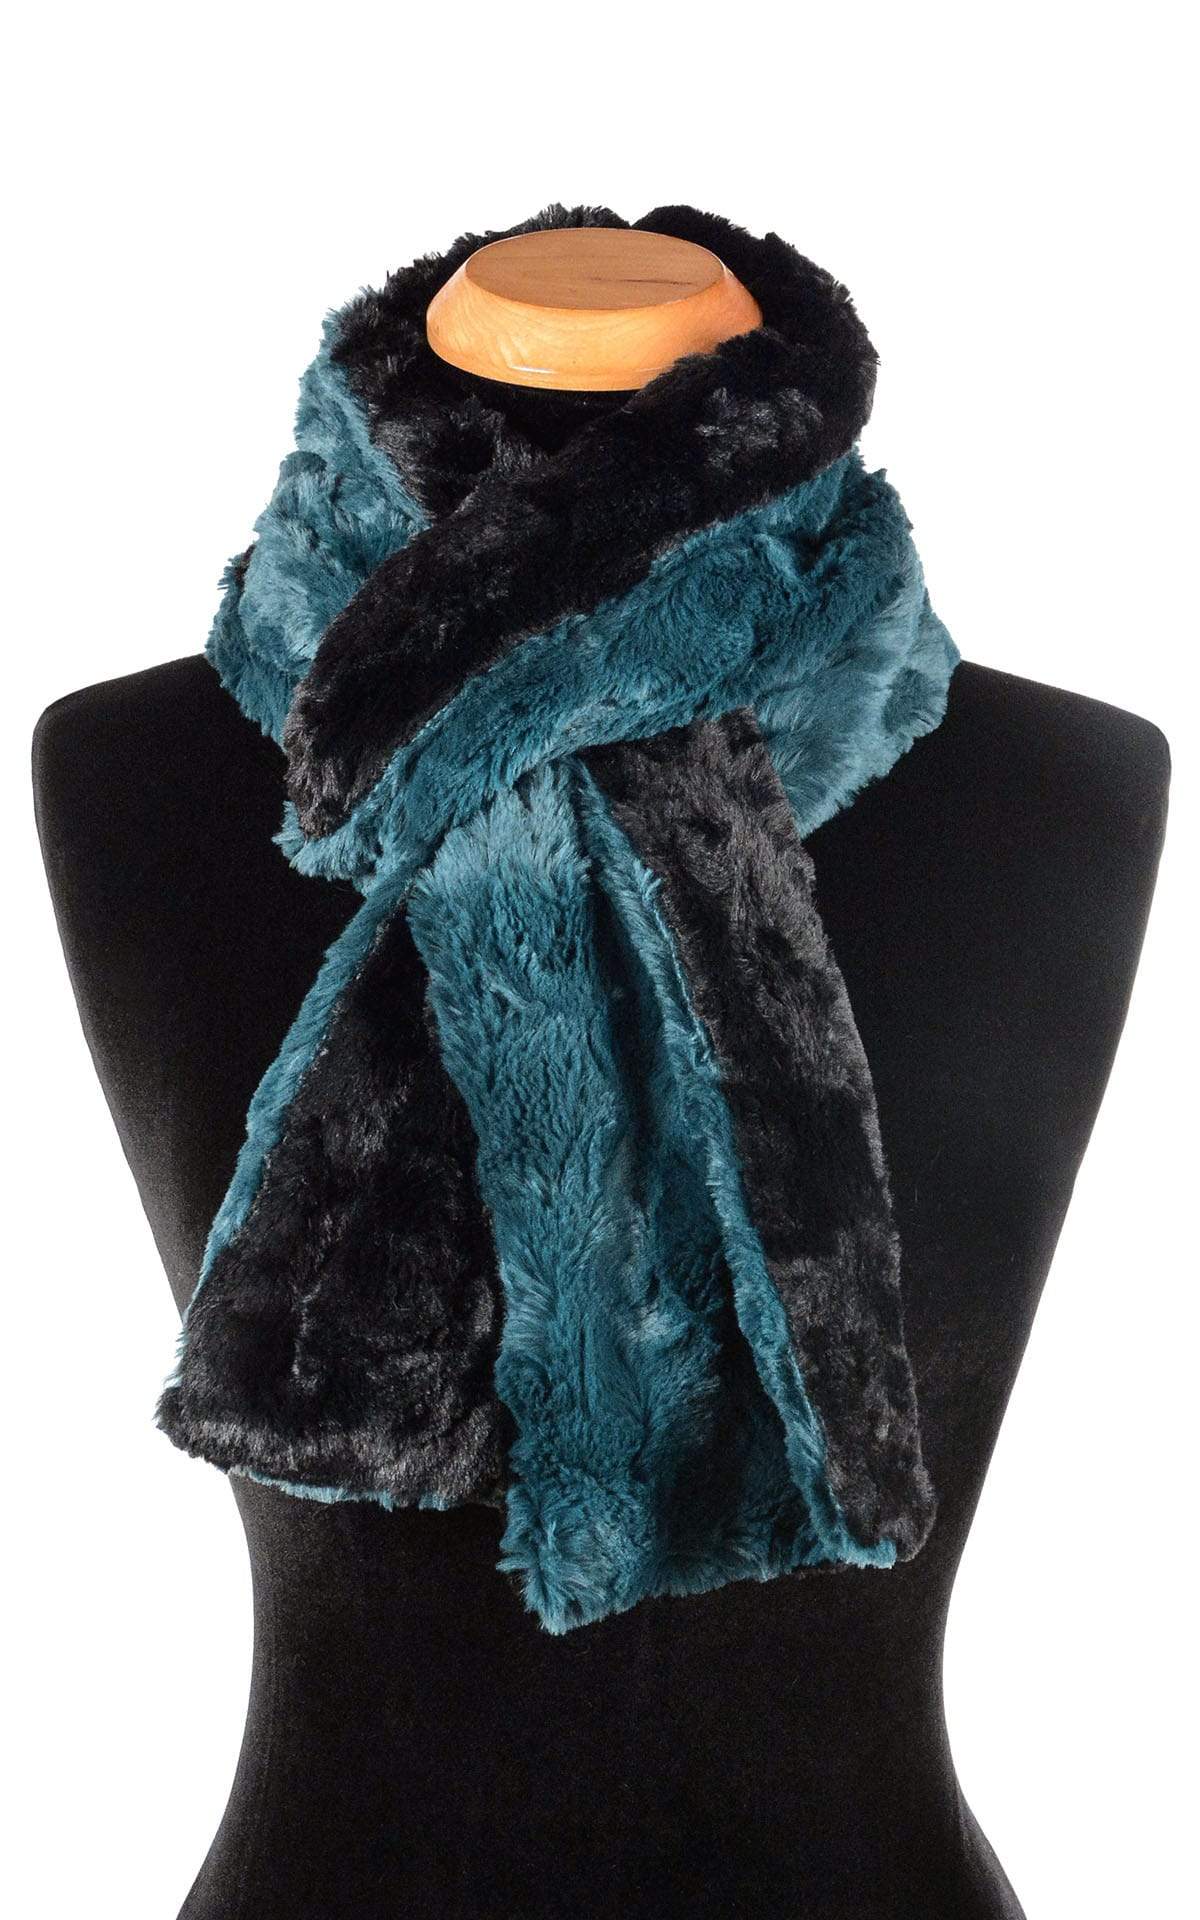 Classic Scarf - Two-Tone, Luxury Faux Fur in Peacock Pond